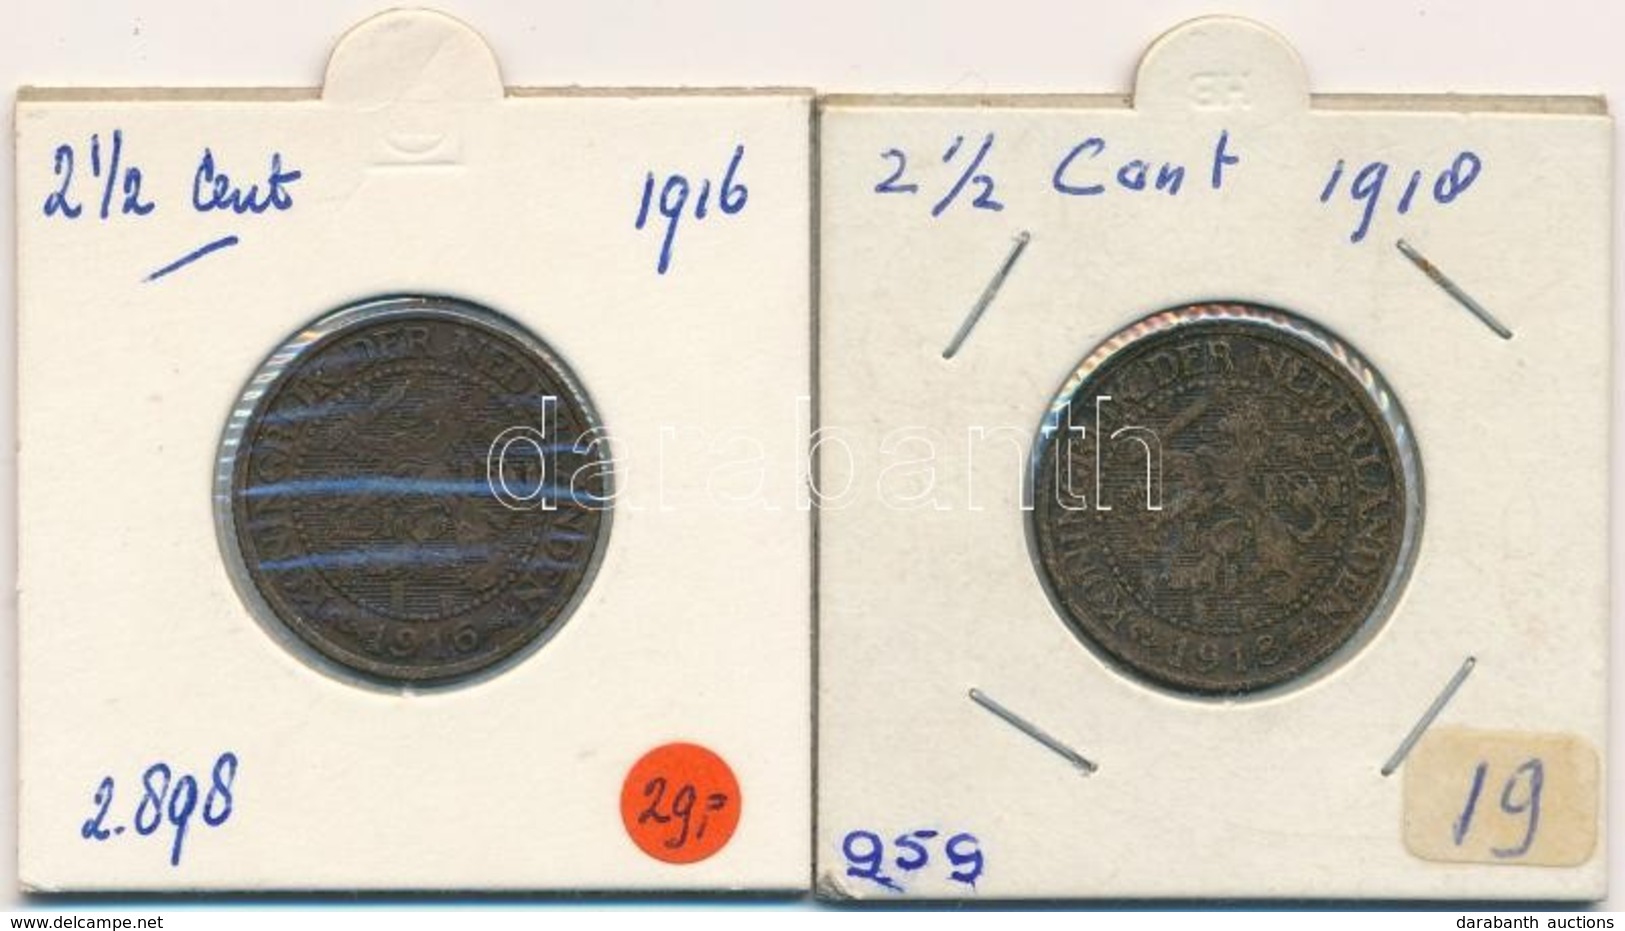 Hollandia 1916-1918. 2 1/2c Br (2x) T:2,2- Patina 
Netherlands 1916-1918. 2 1/2 Cents (2x) Br C:XF,VF Patina
Krause KM#1 - Unclassified